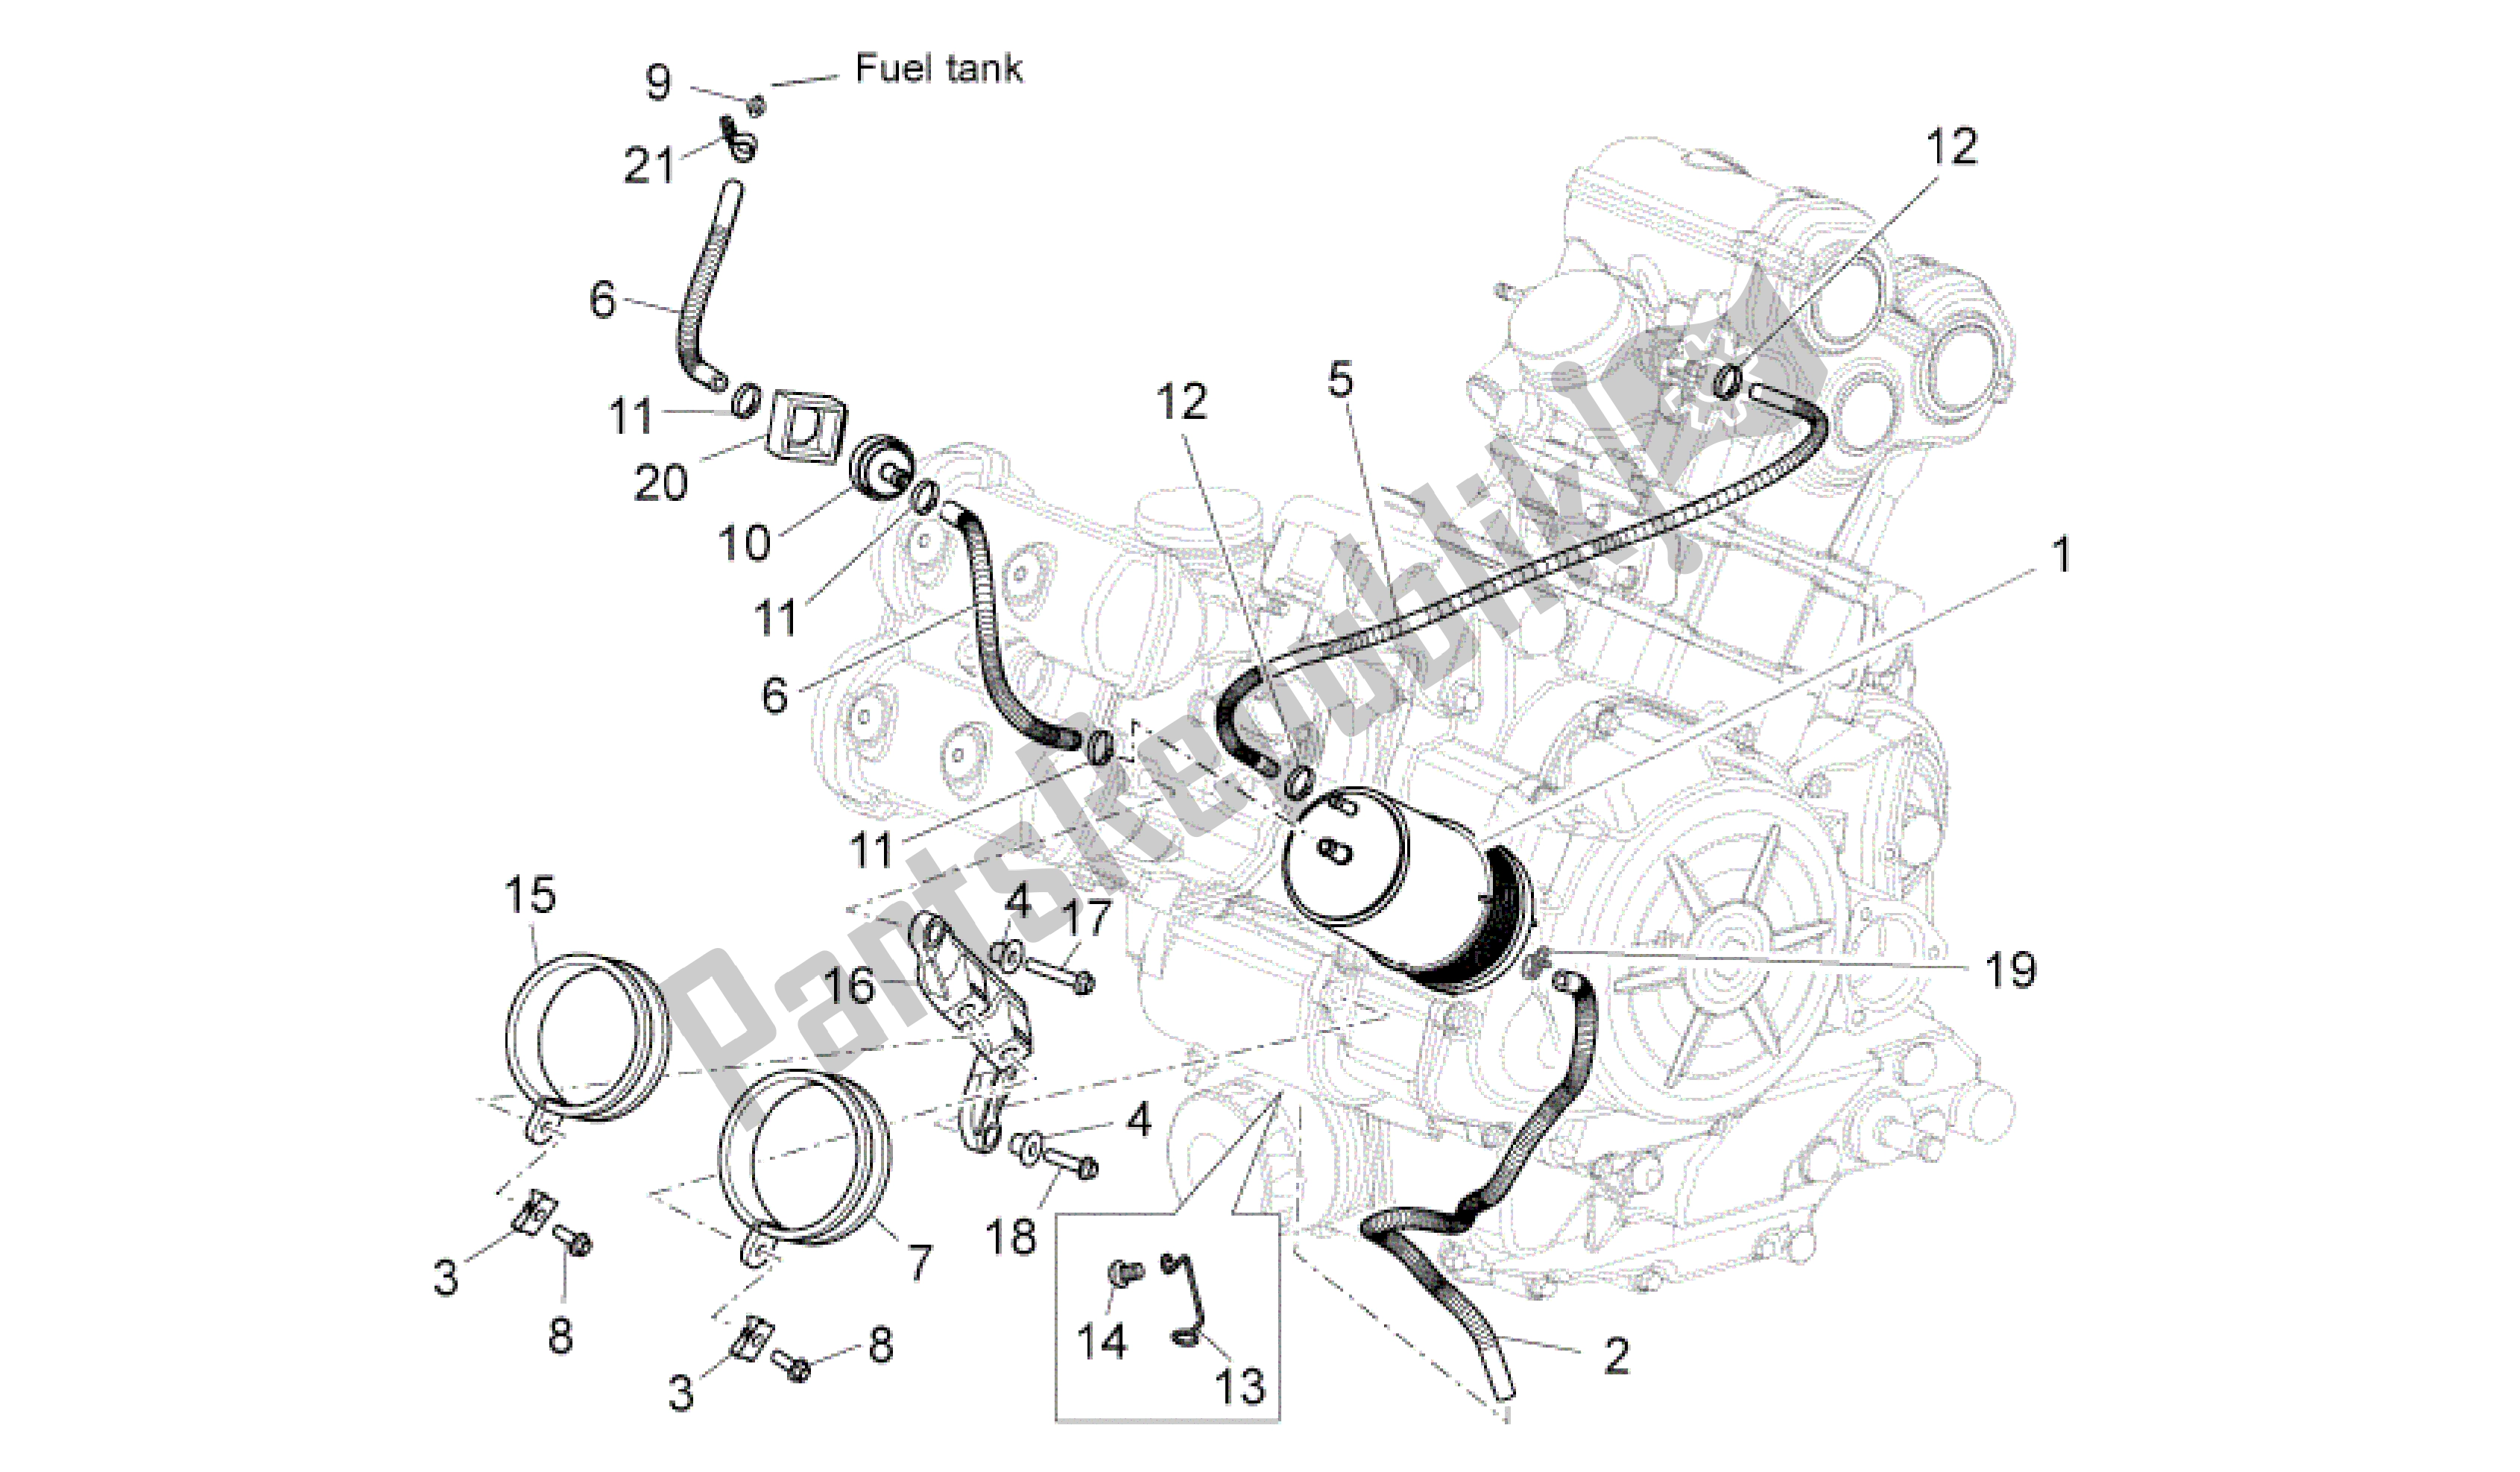 All parts for the Fuel Vapour Recover System of the Aprilia Shiver 750 2007 - 2009